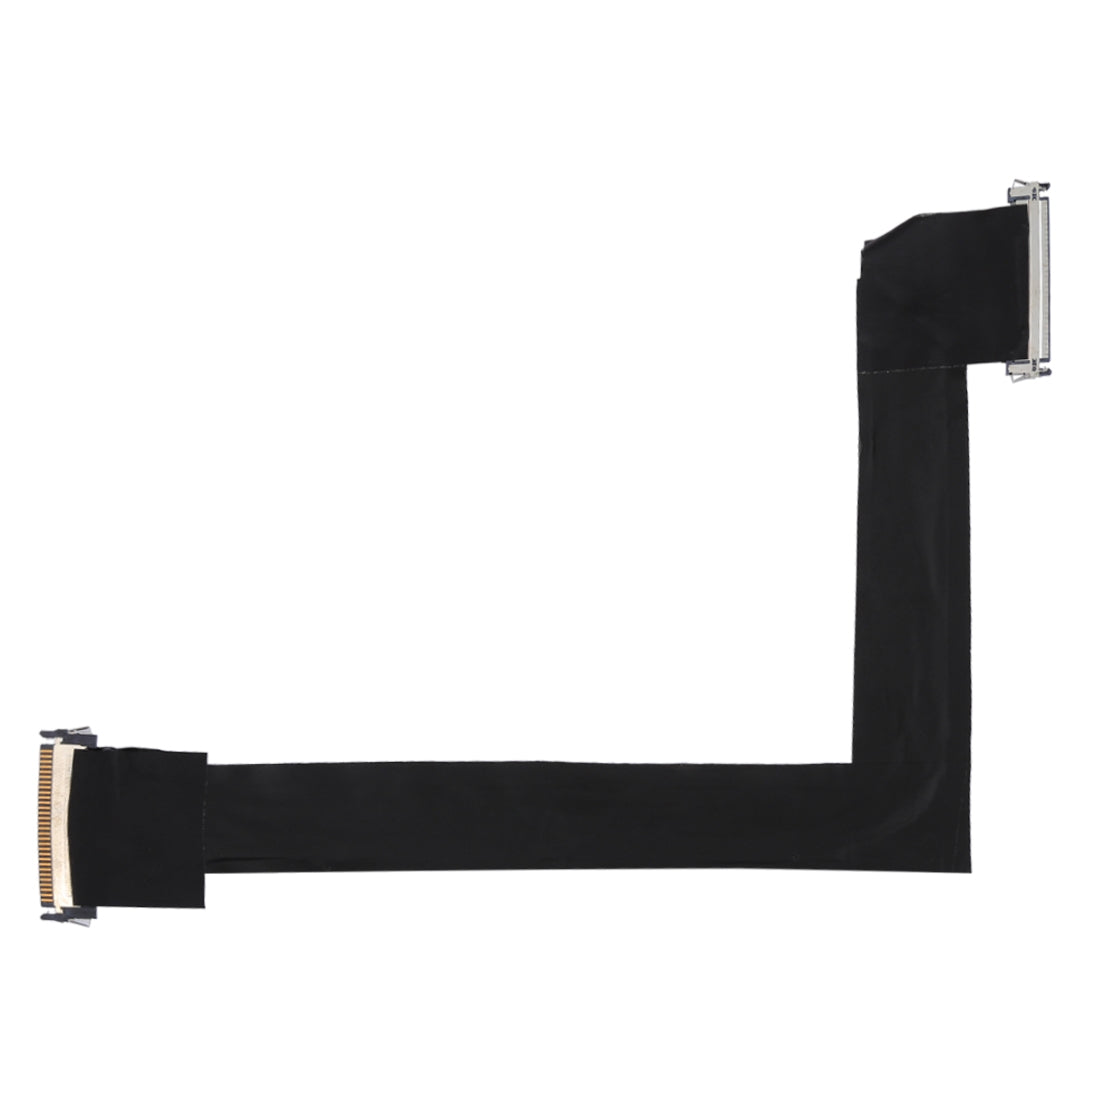 LCD Connector Flex Cable Apple iMac 27 A1312 2010